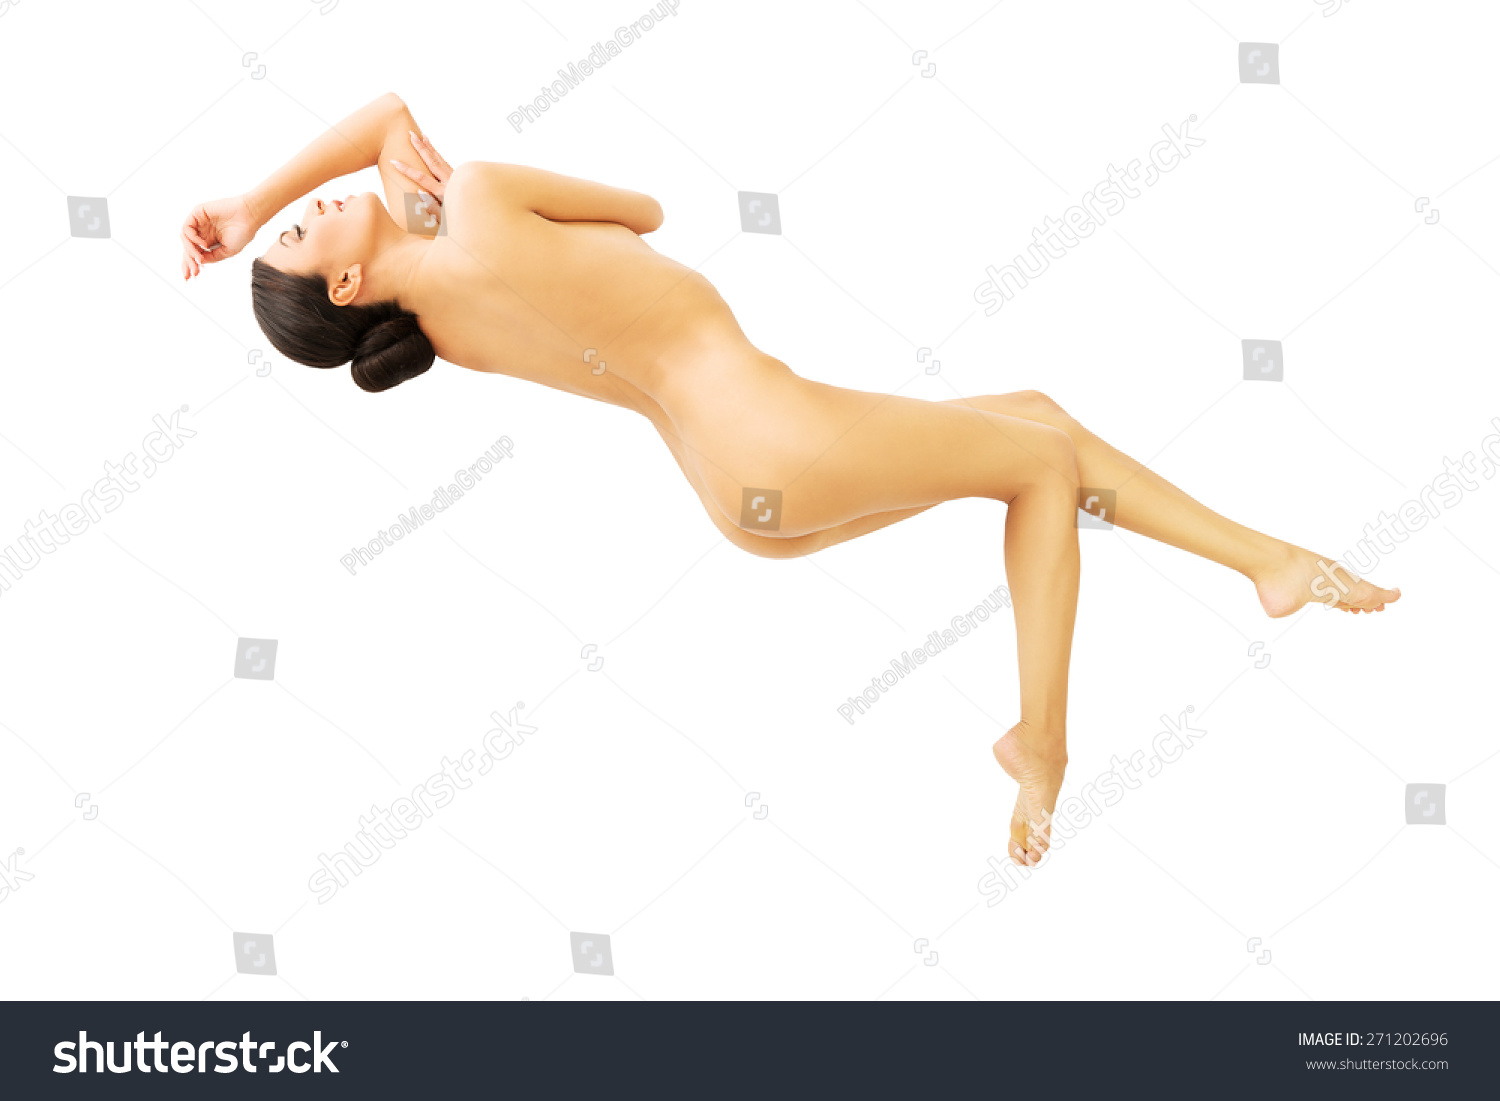 Naked lying on her side